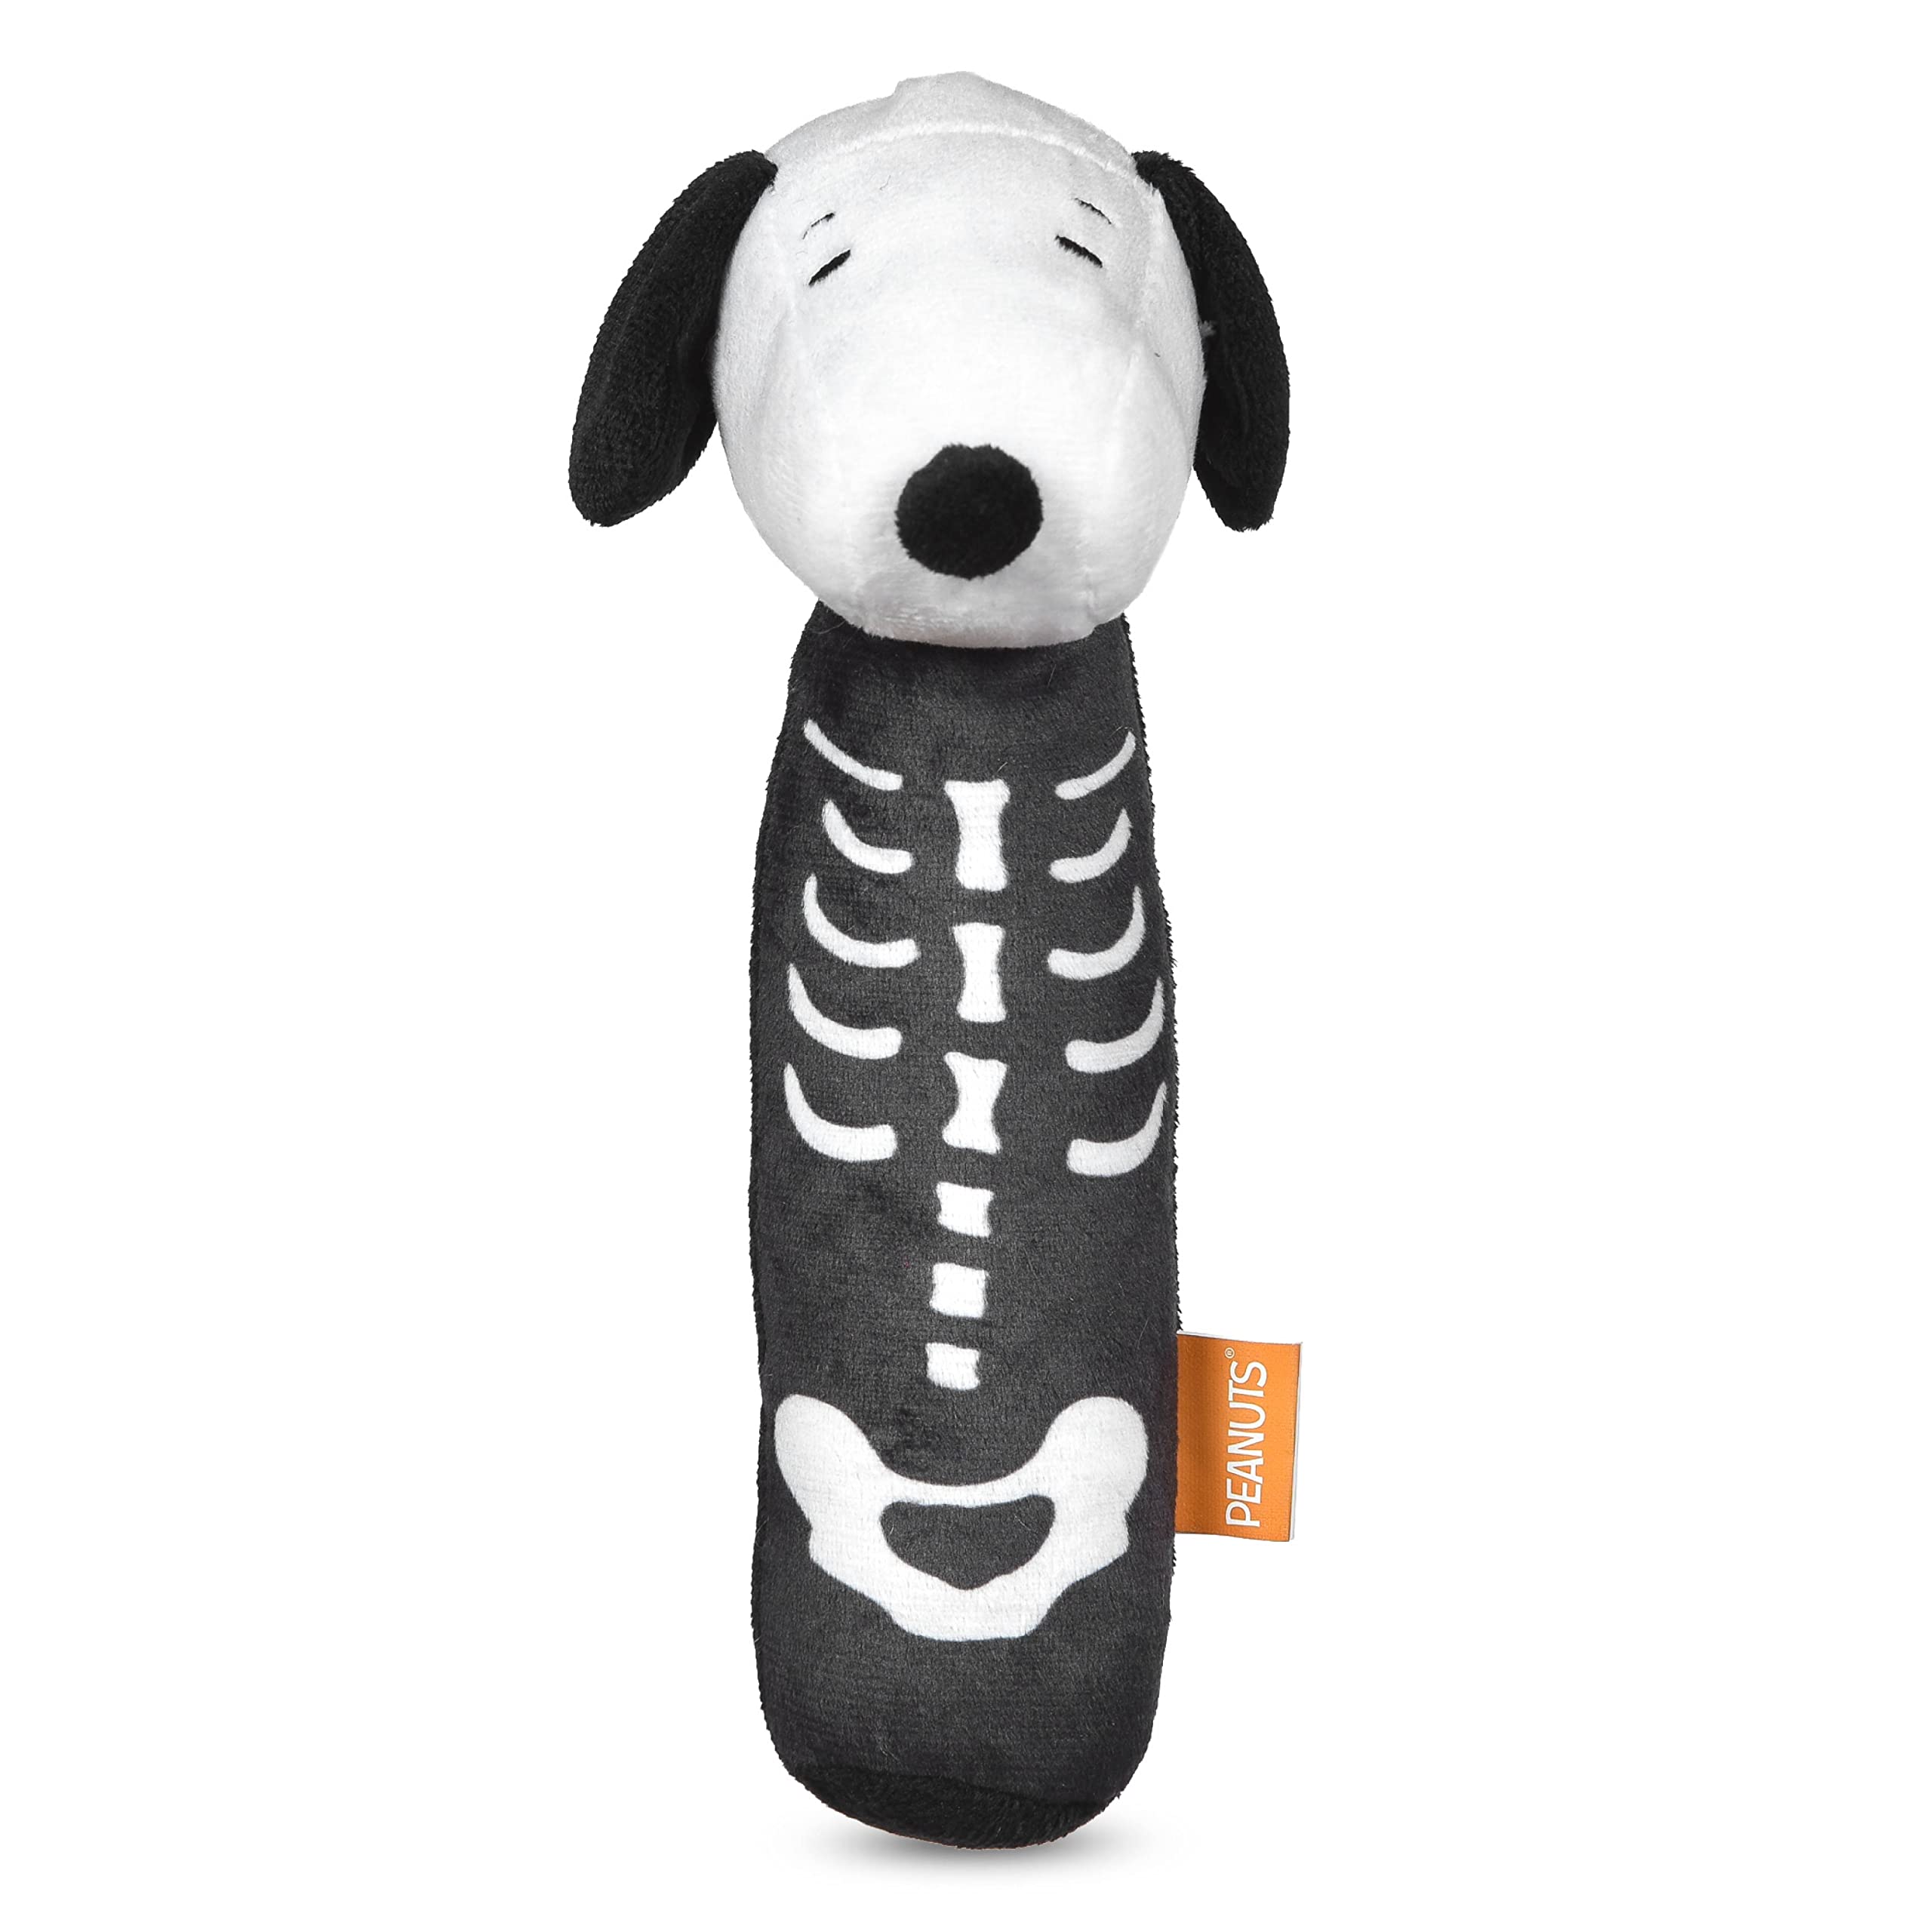 Peanuts for Pets Peanuts 12” Snoopy Skeleton Bobo Squeaker Pet Toy Halloween Snoopy Squeaky Pet Toy | Peanuts Dog Toys, Snoopy f